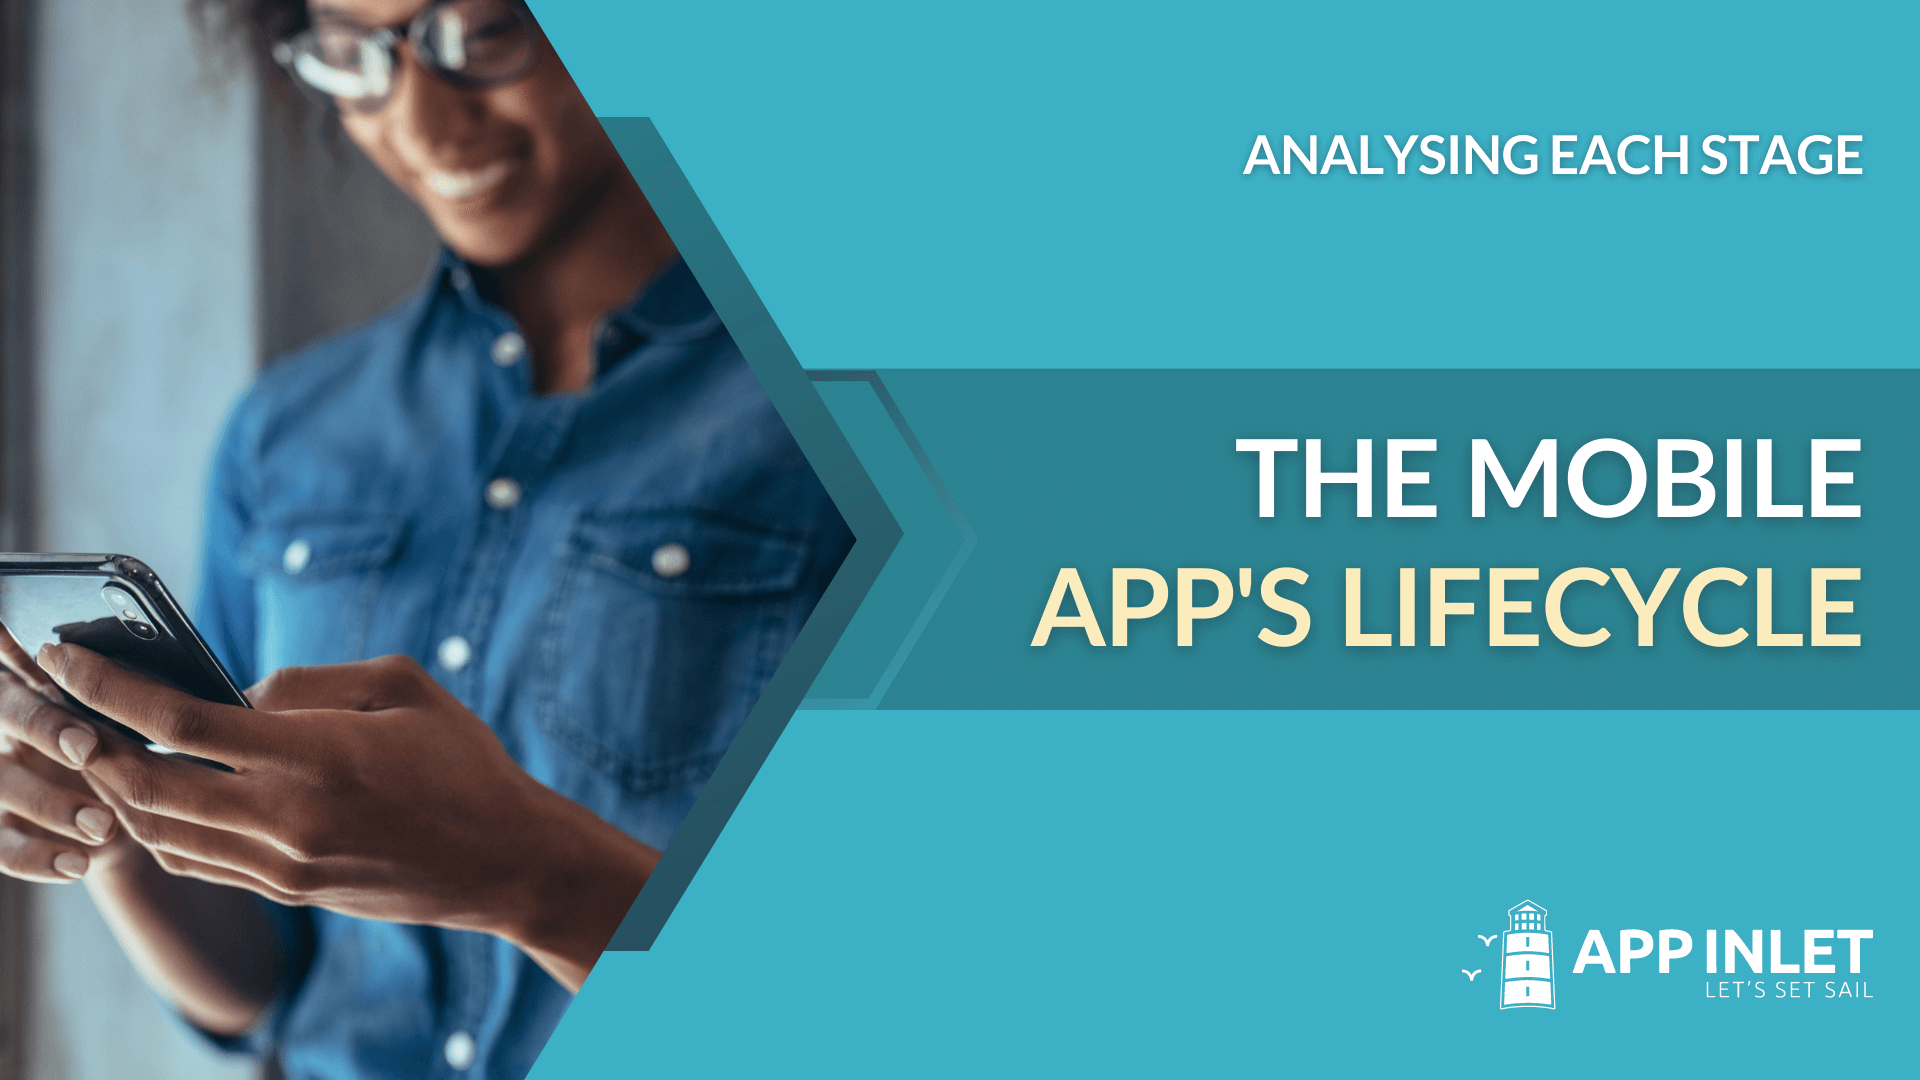 The Mobile App's Lifecycle